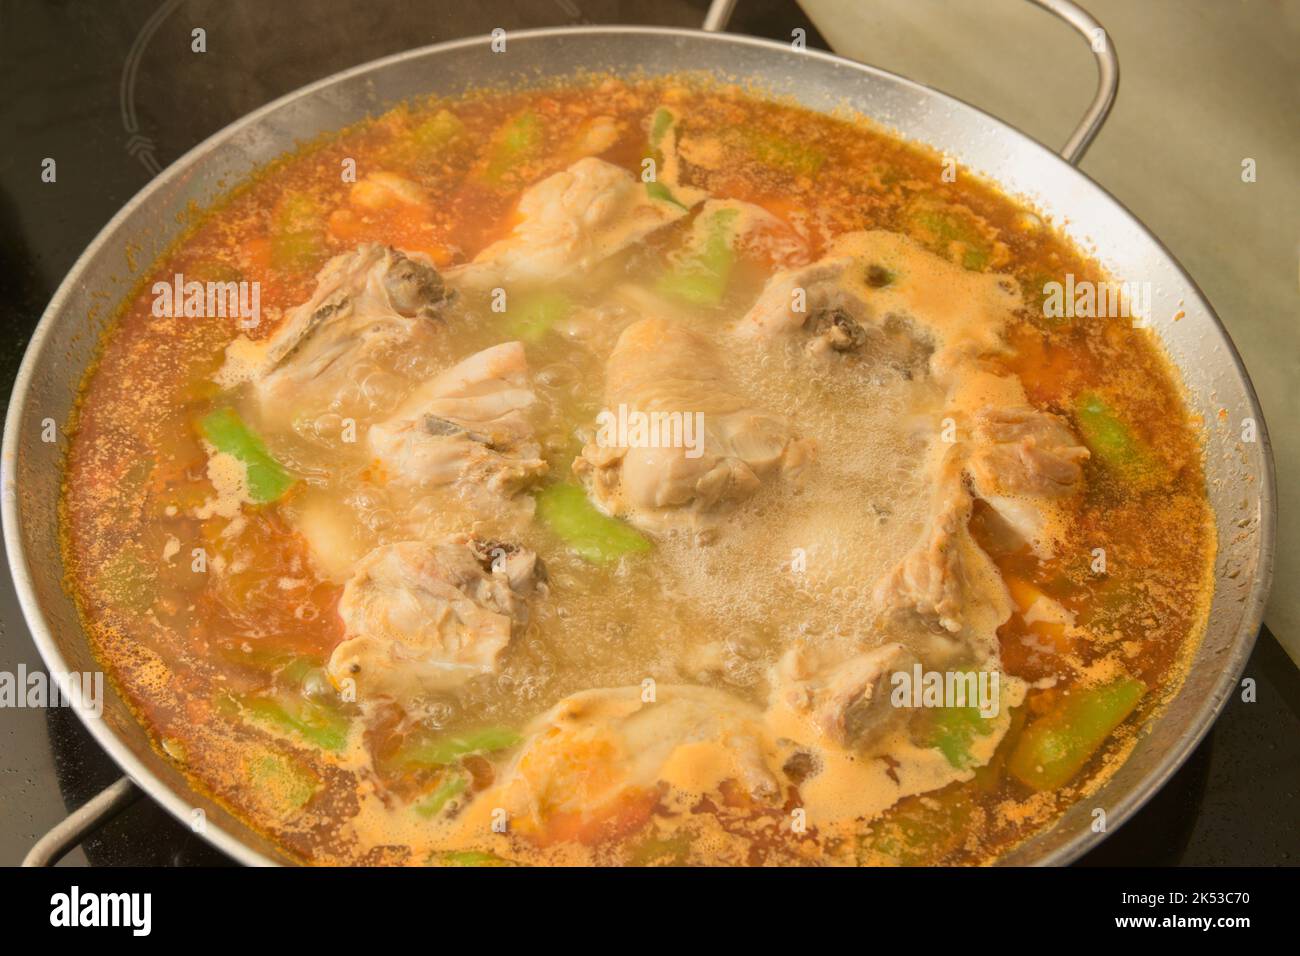 Image of a Valencian paella that is in the process of being prepared with boiling water in a homemade ceramic hob Stock Photo